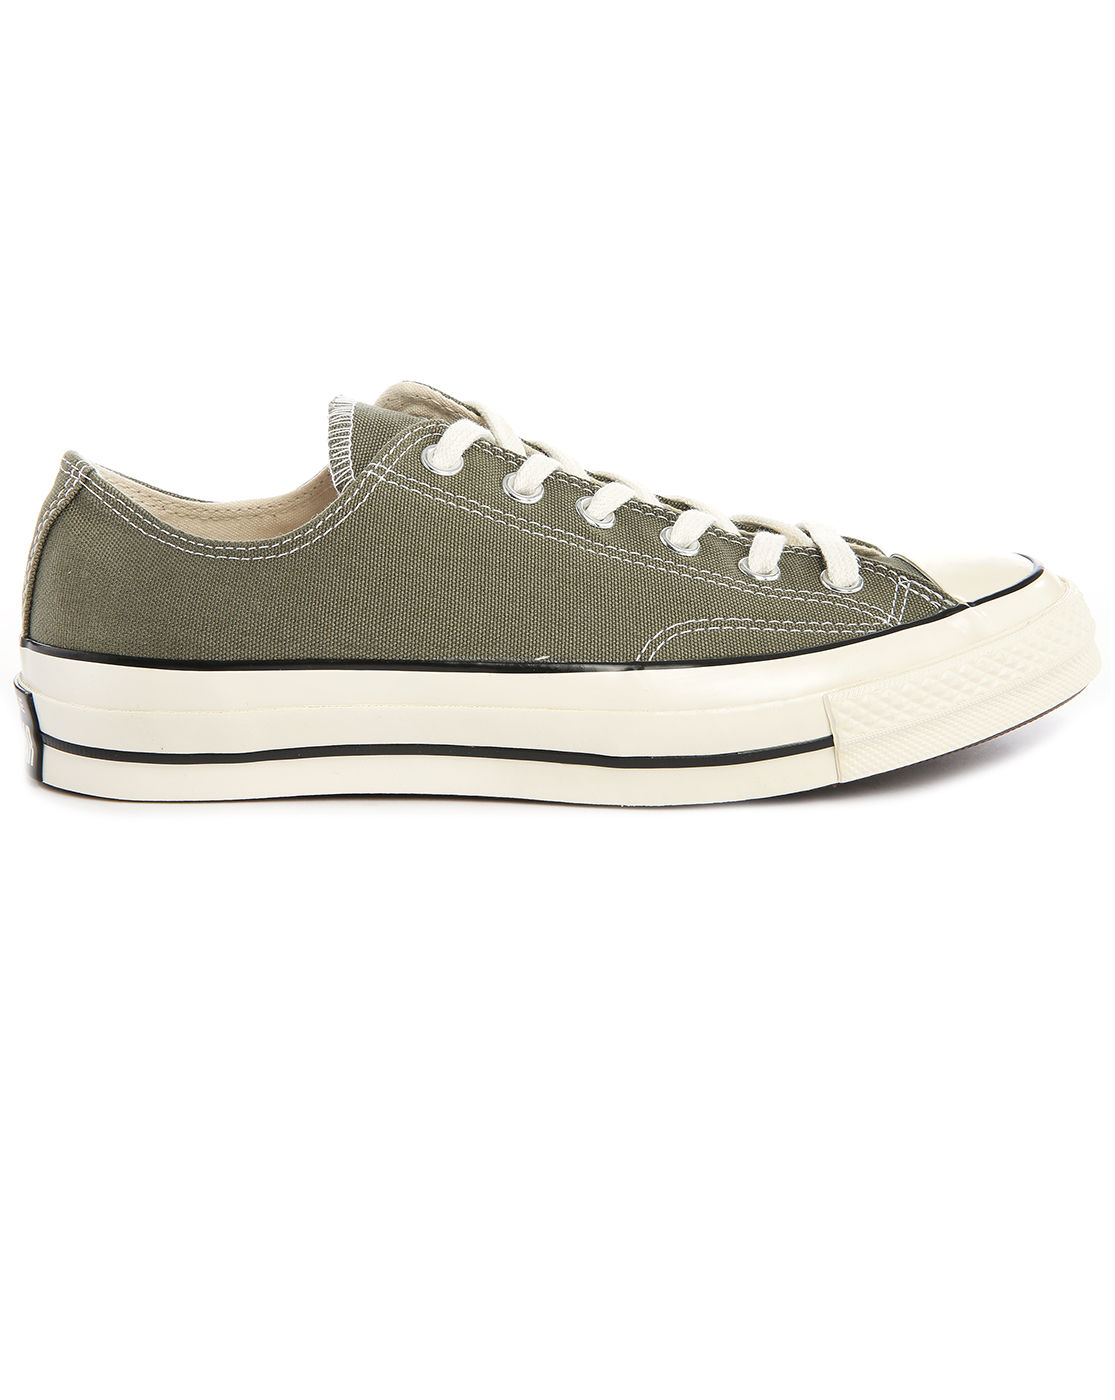 olive green converse low top